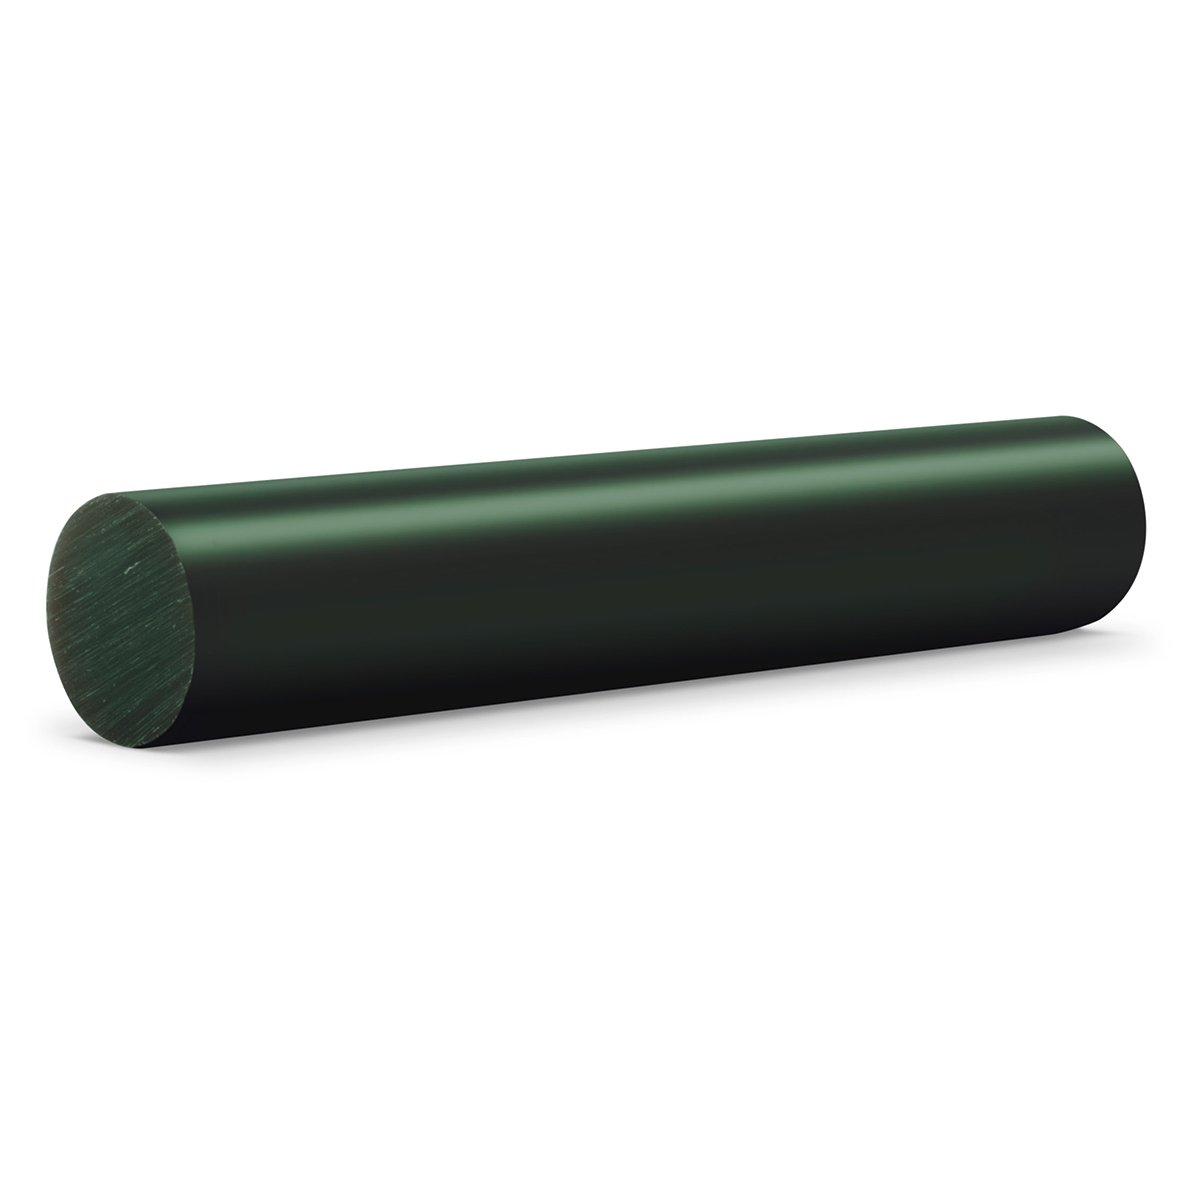 Carving wax tube, Ø 21 mm, round solid, green, hard